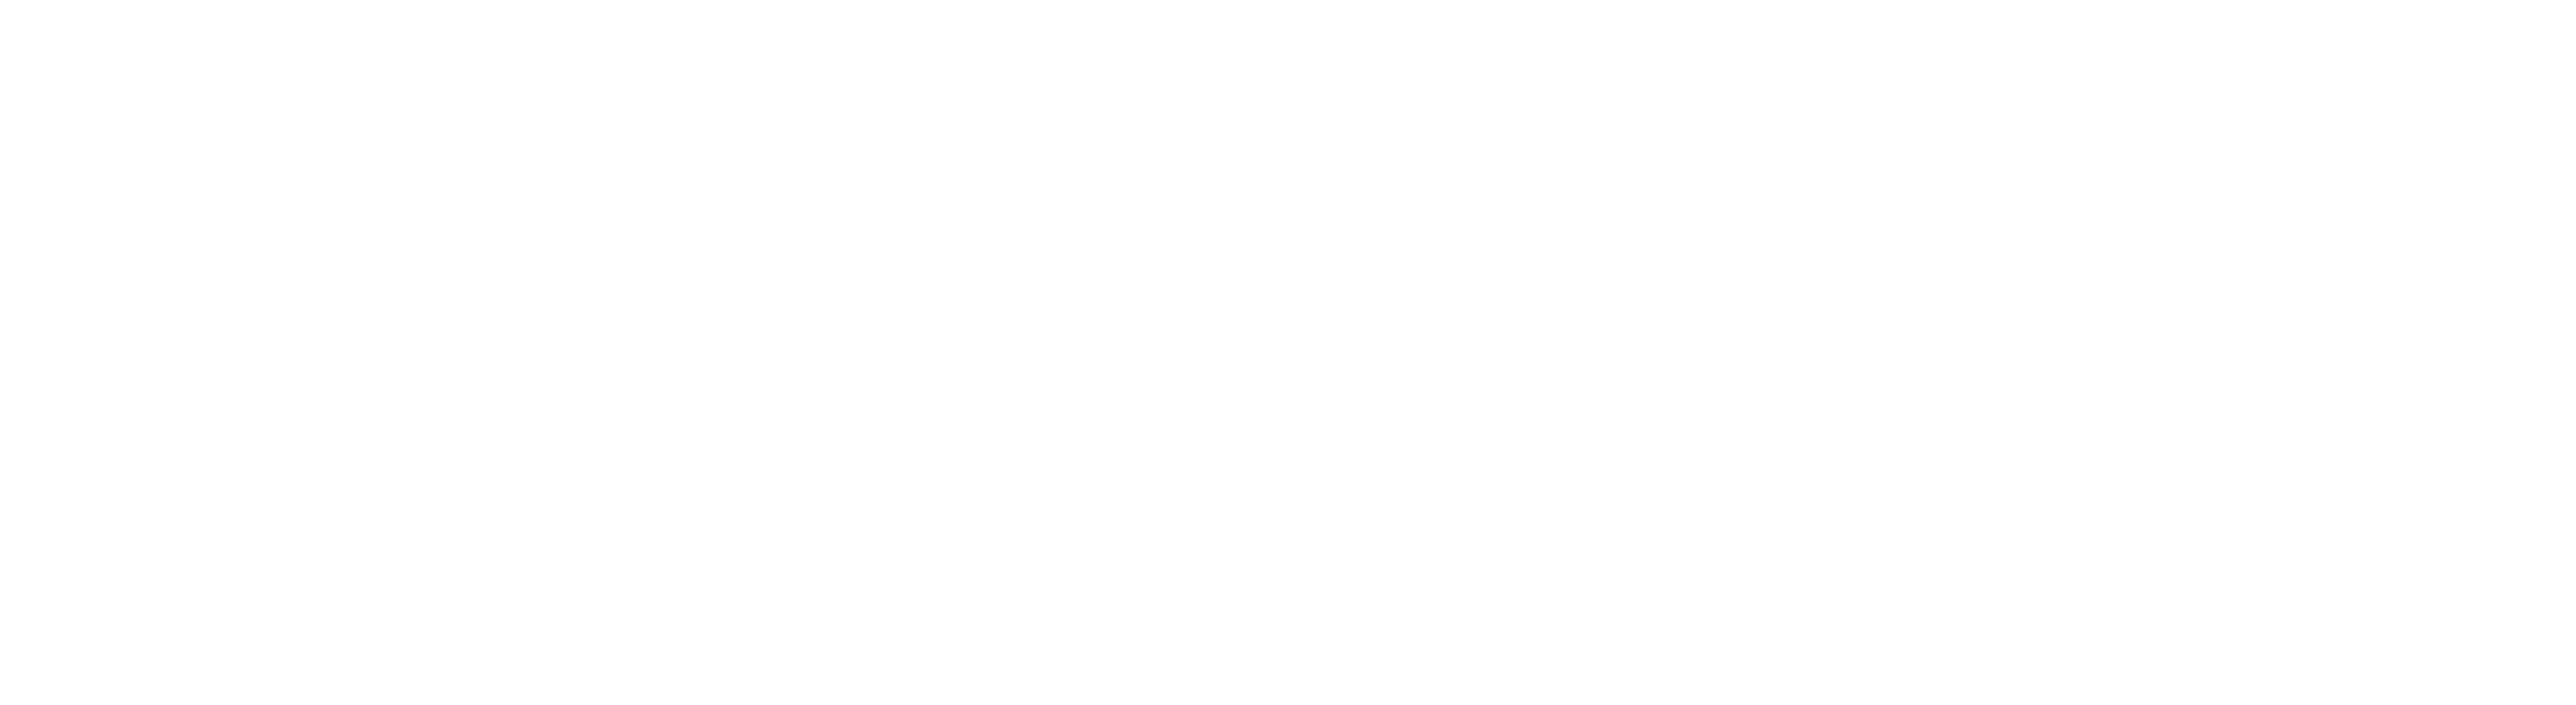 Orsted_Logo_White_RGB.png 